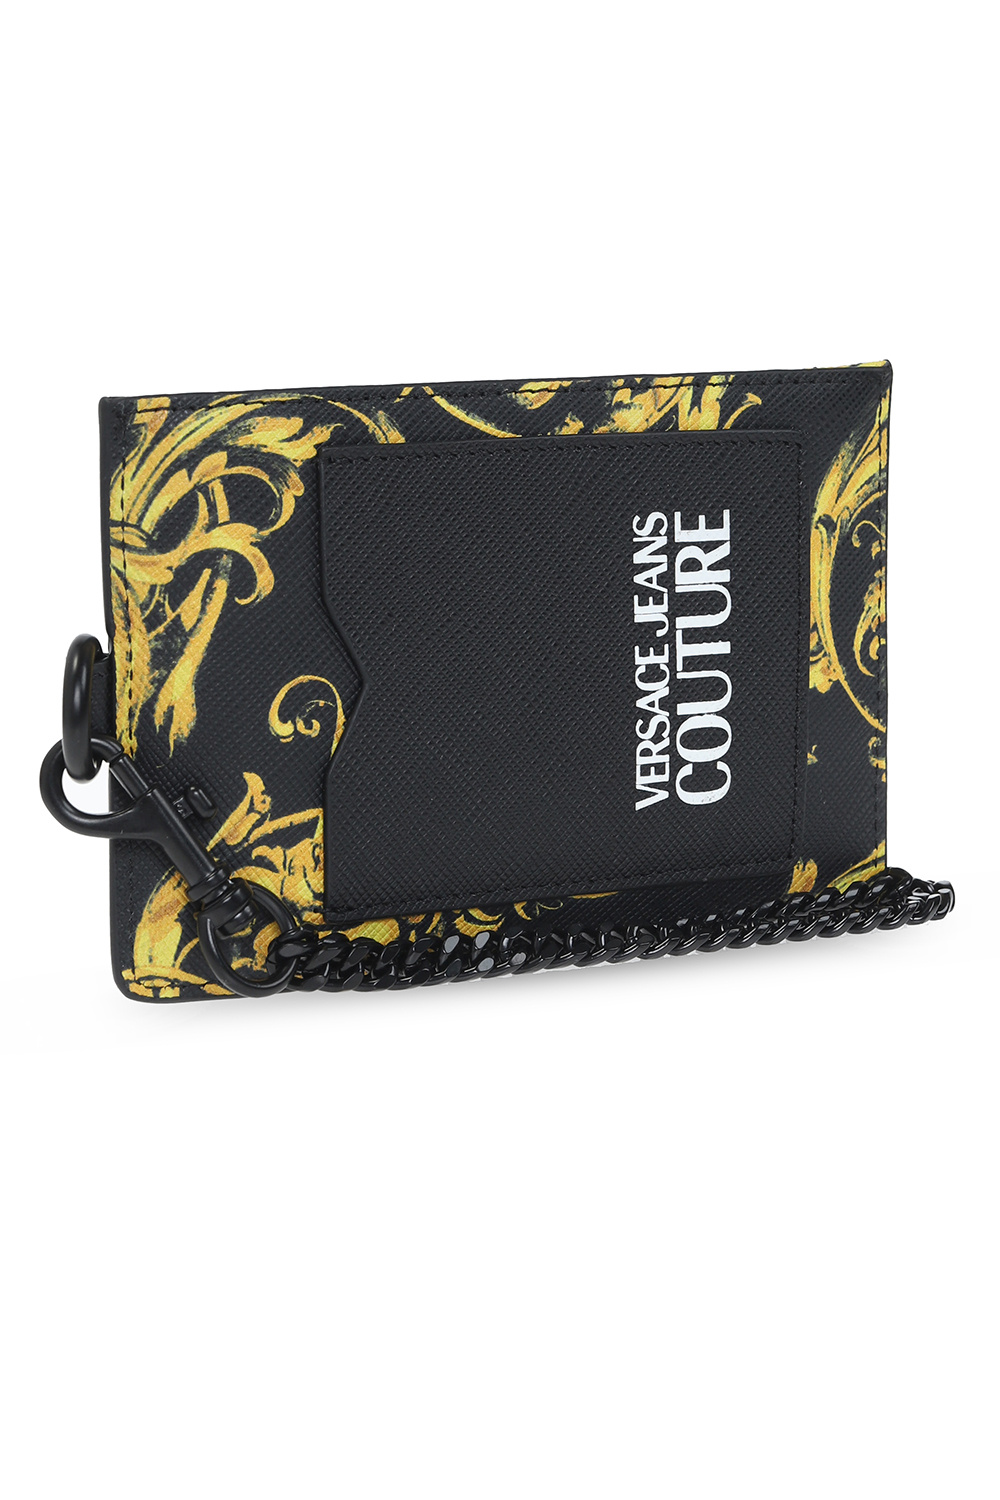 Versace Jeans Couture Card case on chain